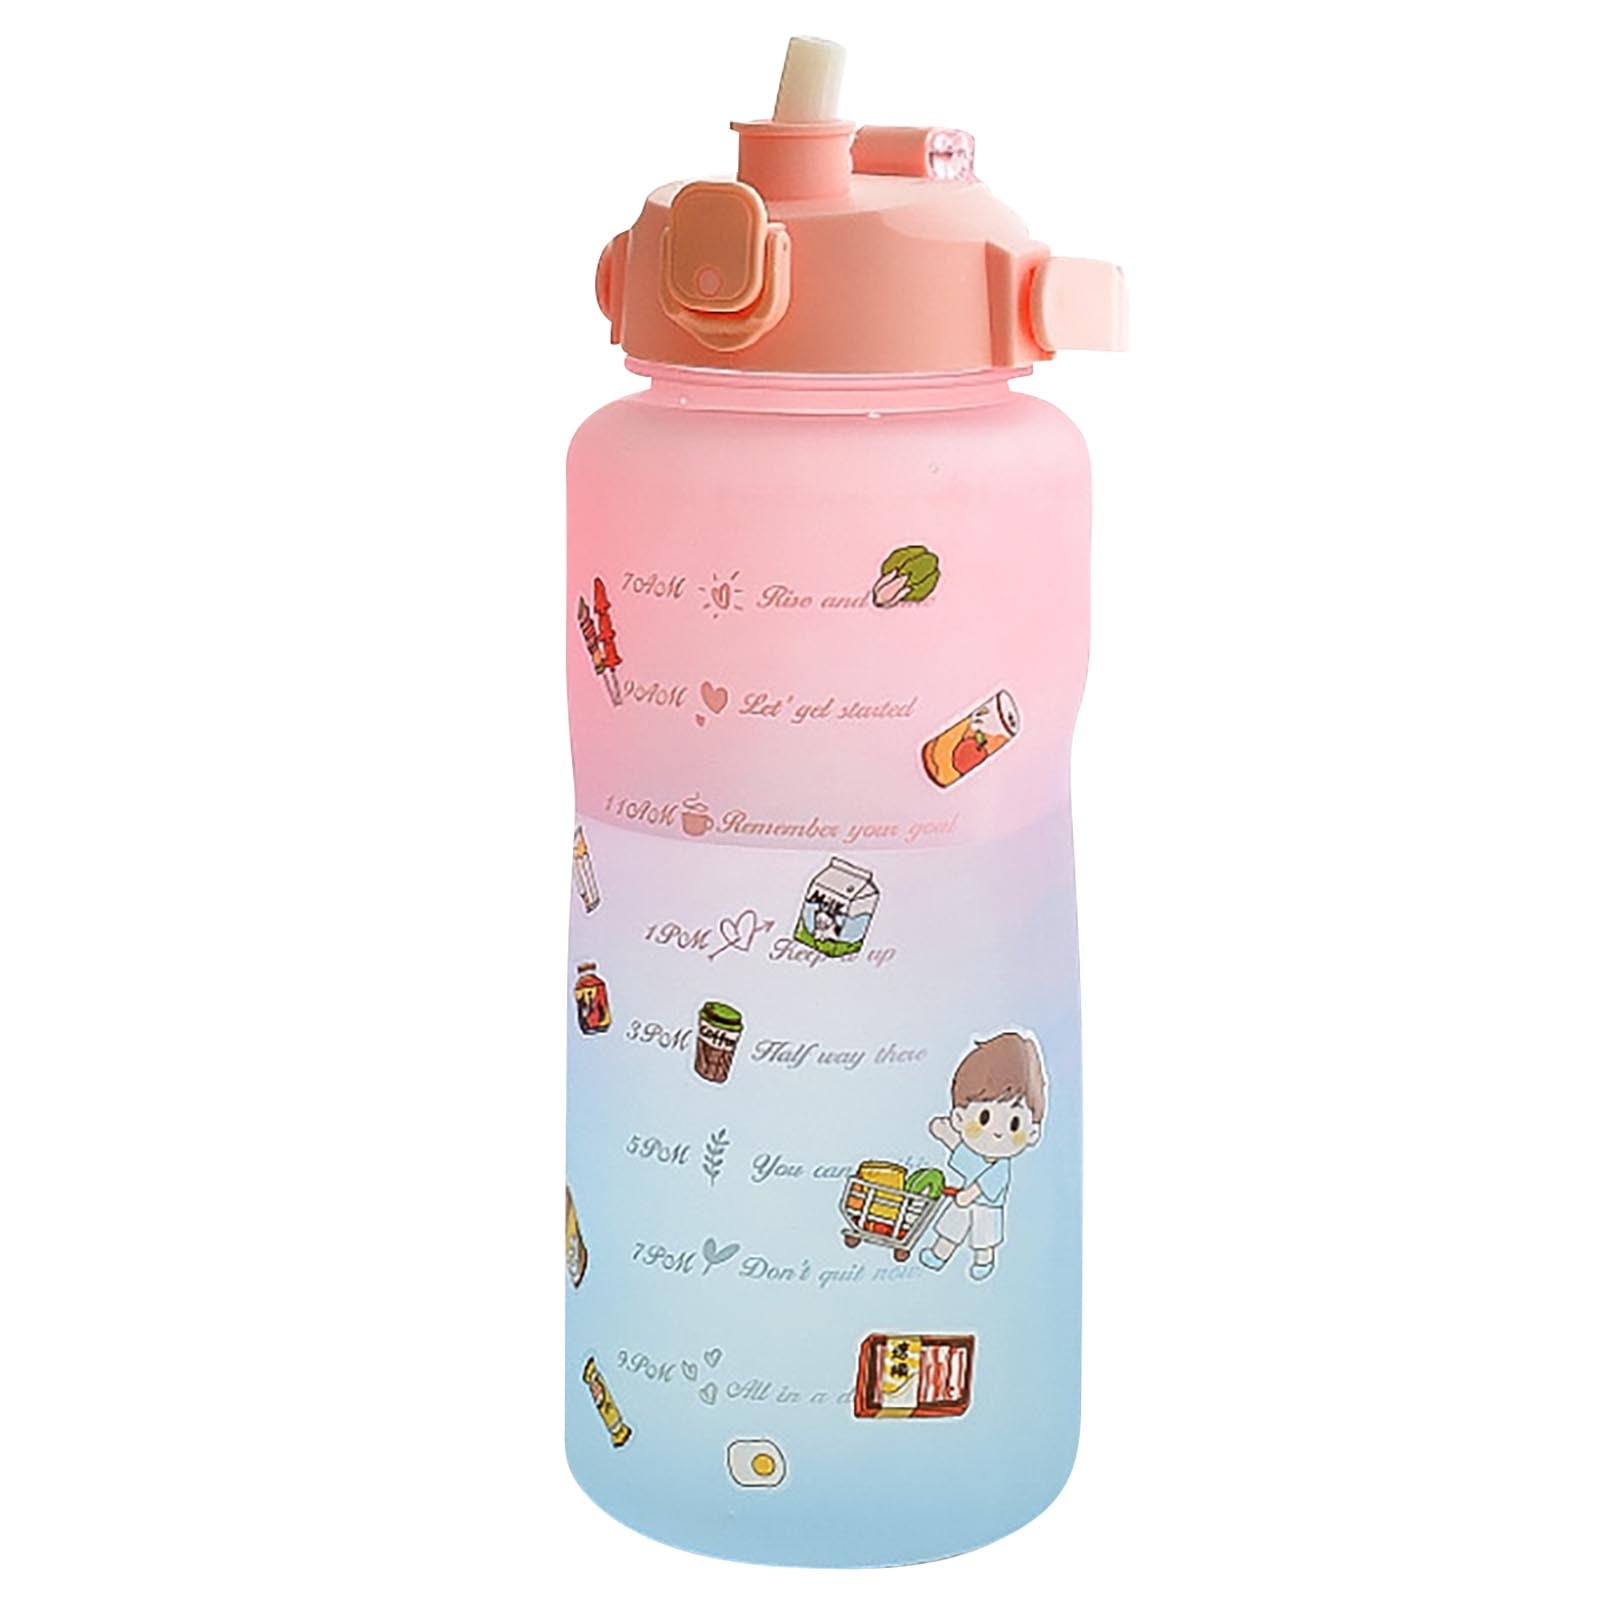 SDJMa BPA Free Plastic Water Bottles Large Sports Water Bottle Leakproof  lid Adults with Hydrating Reminder Motivational for Gym Outdoor Fitness